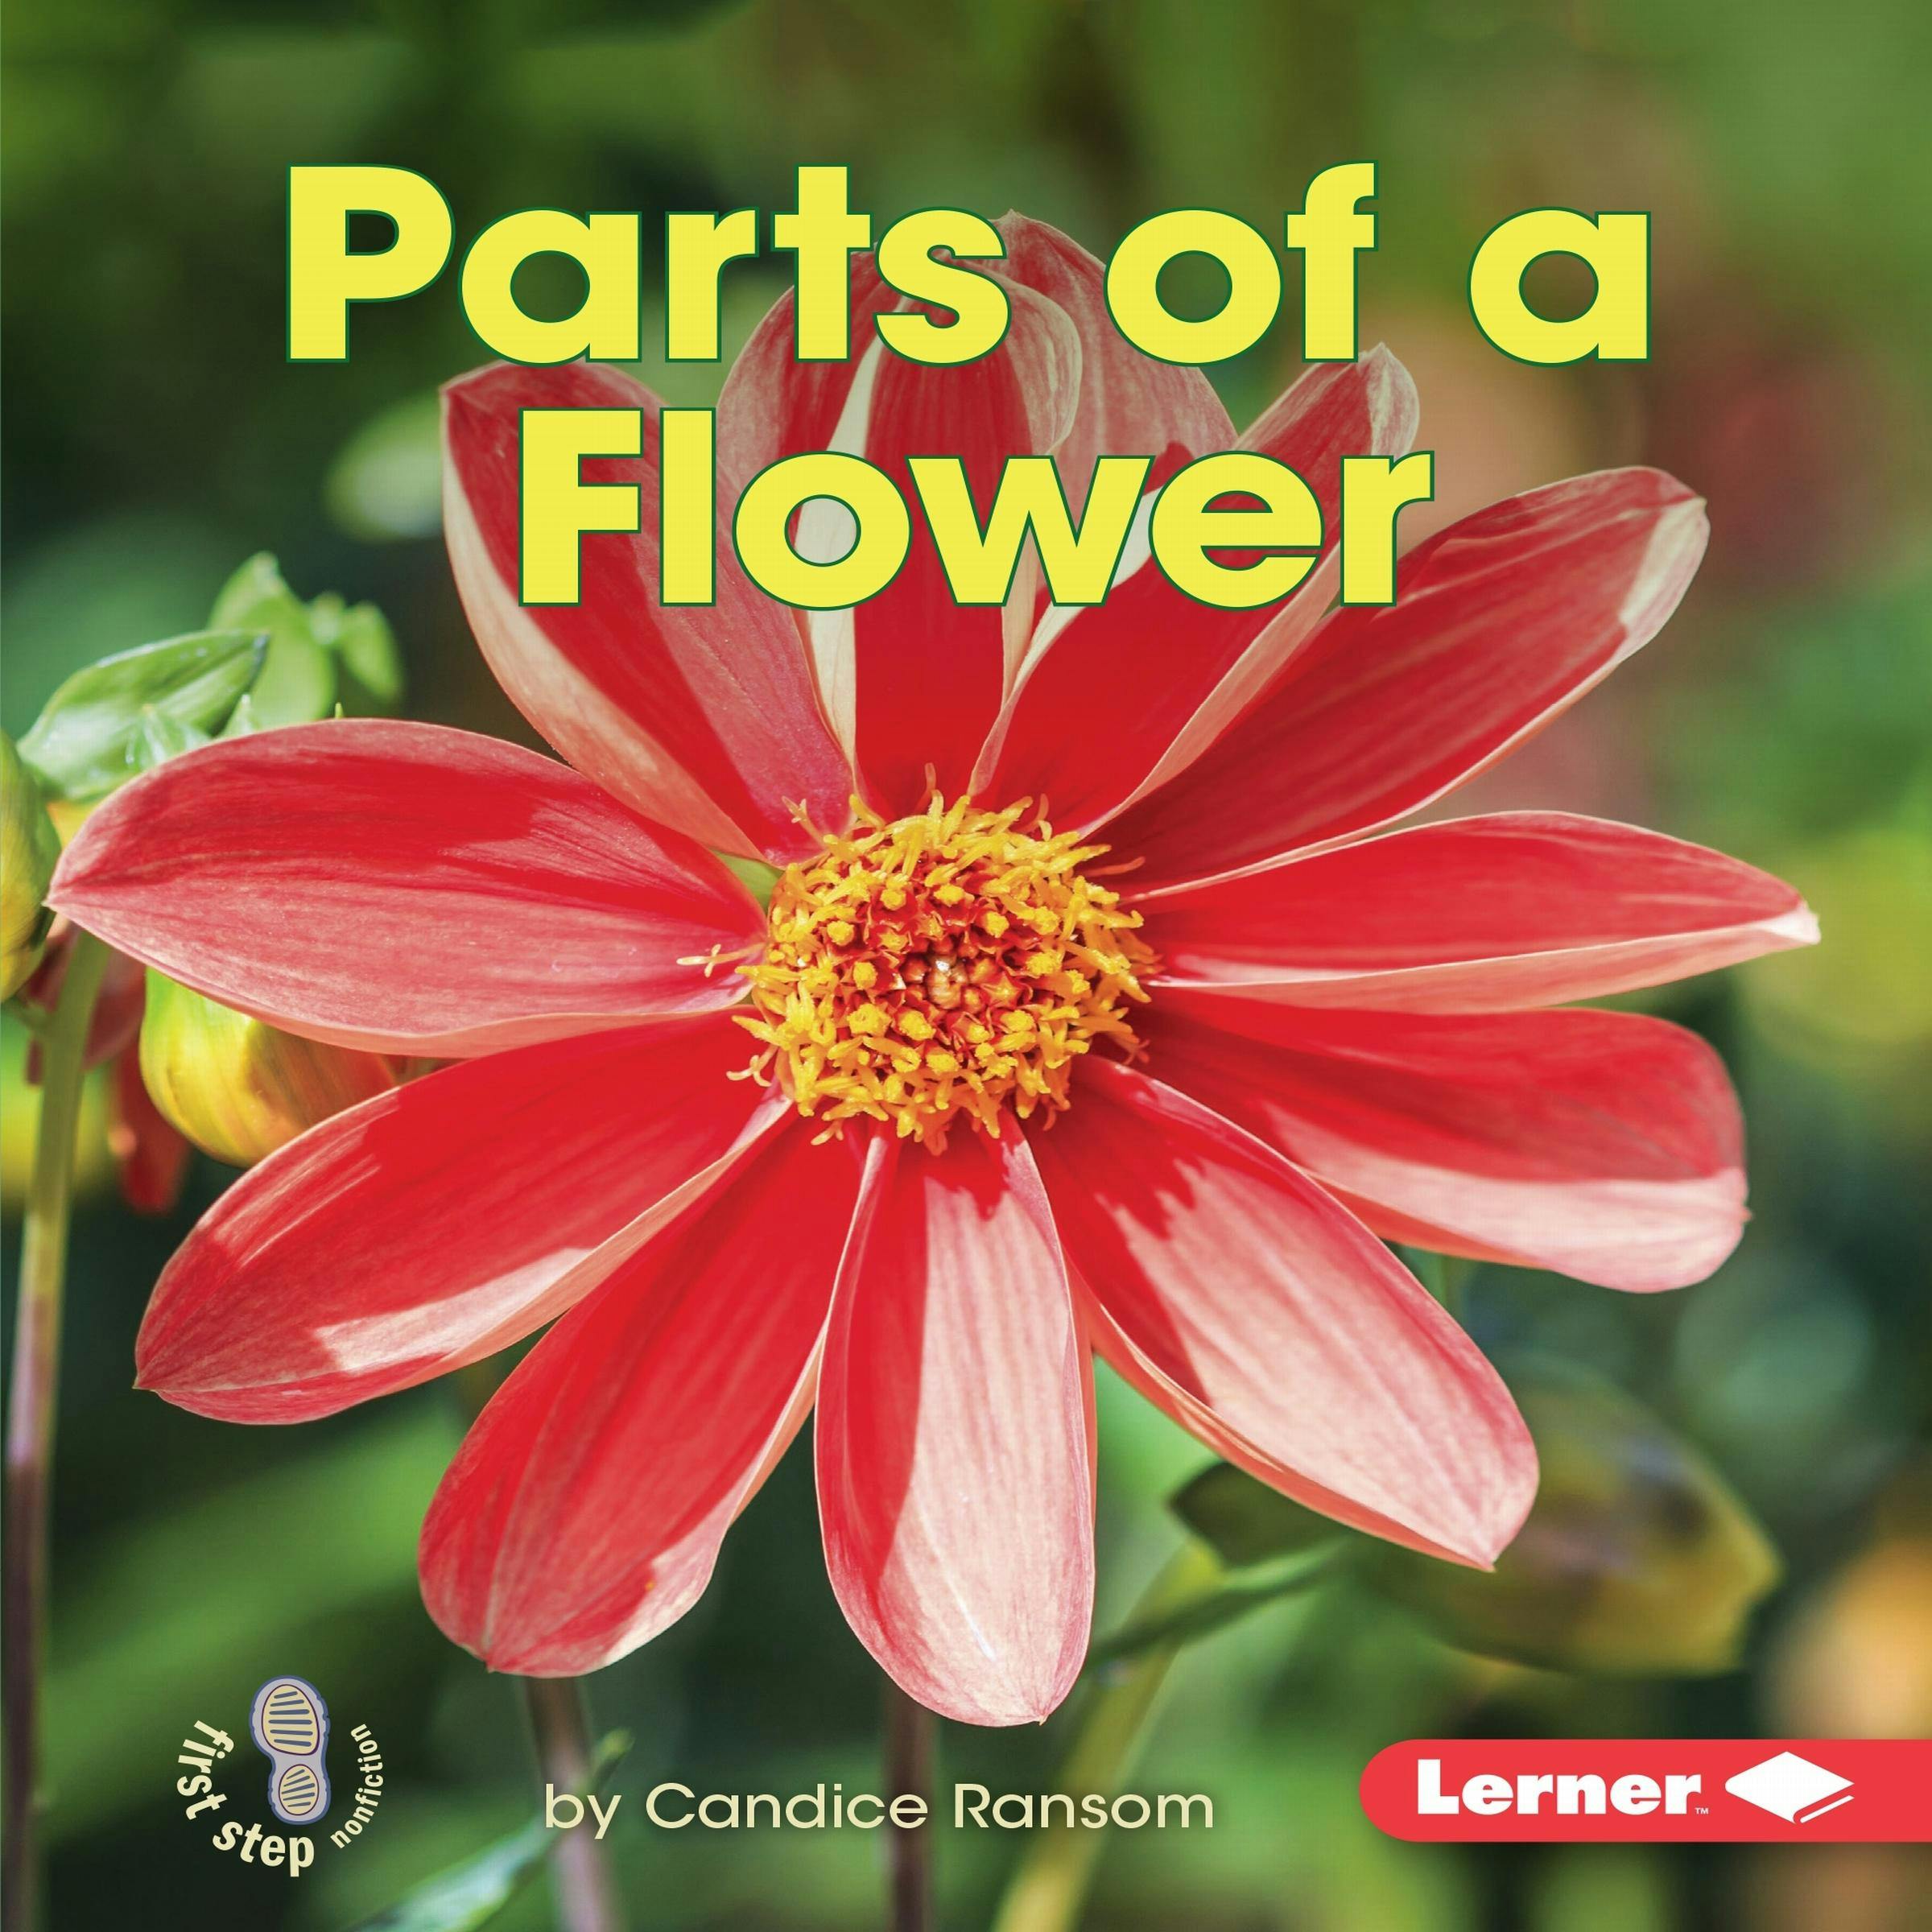 Parts of a Flower - undefined